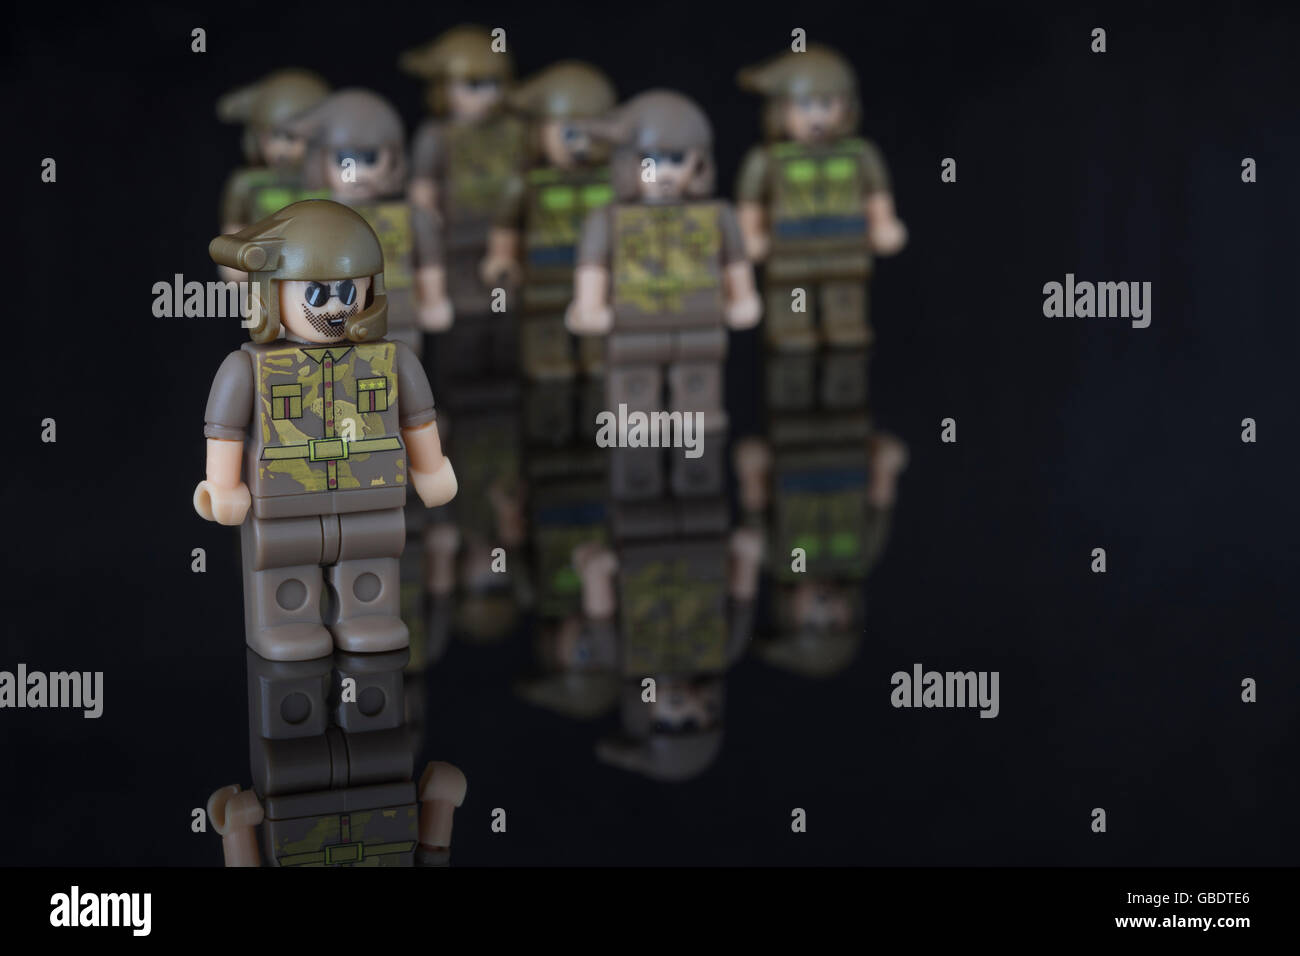 European Army concept, Special Forces / SAS, represented by small toy soldiers. Allegory / metaphor for teamwork and leadership. Stock Photo